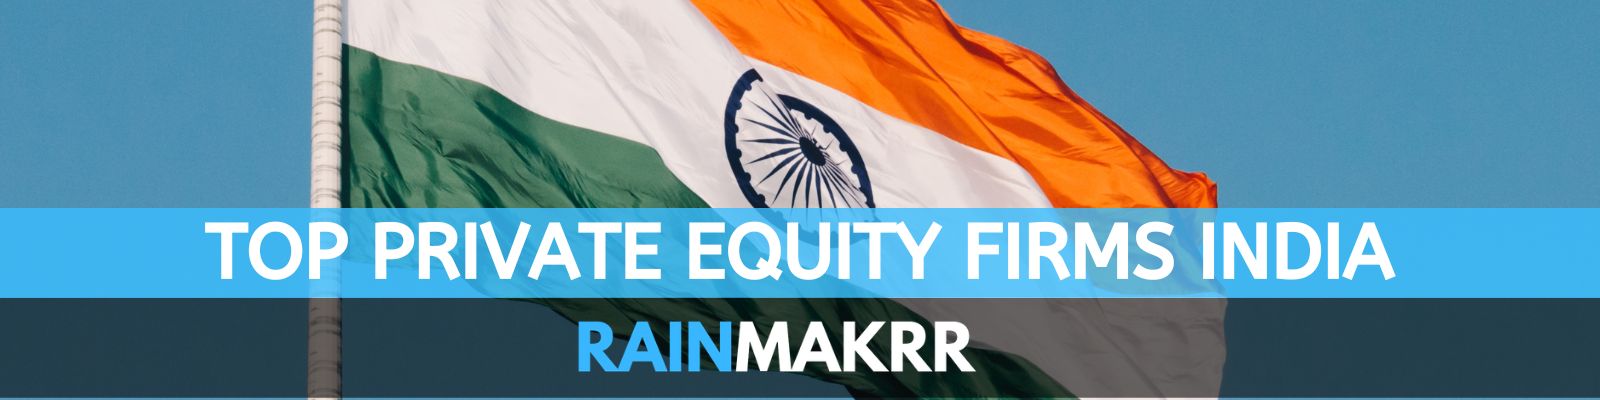 top private equity firms in india private equity india top private equity firms india dt